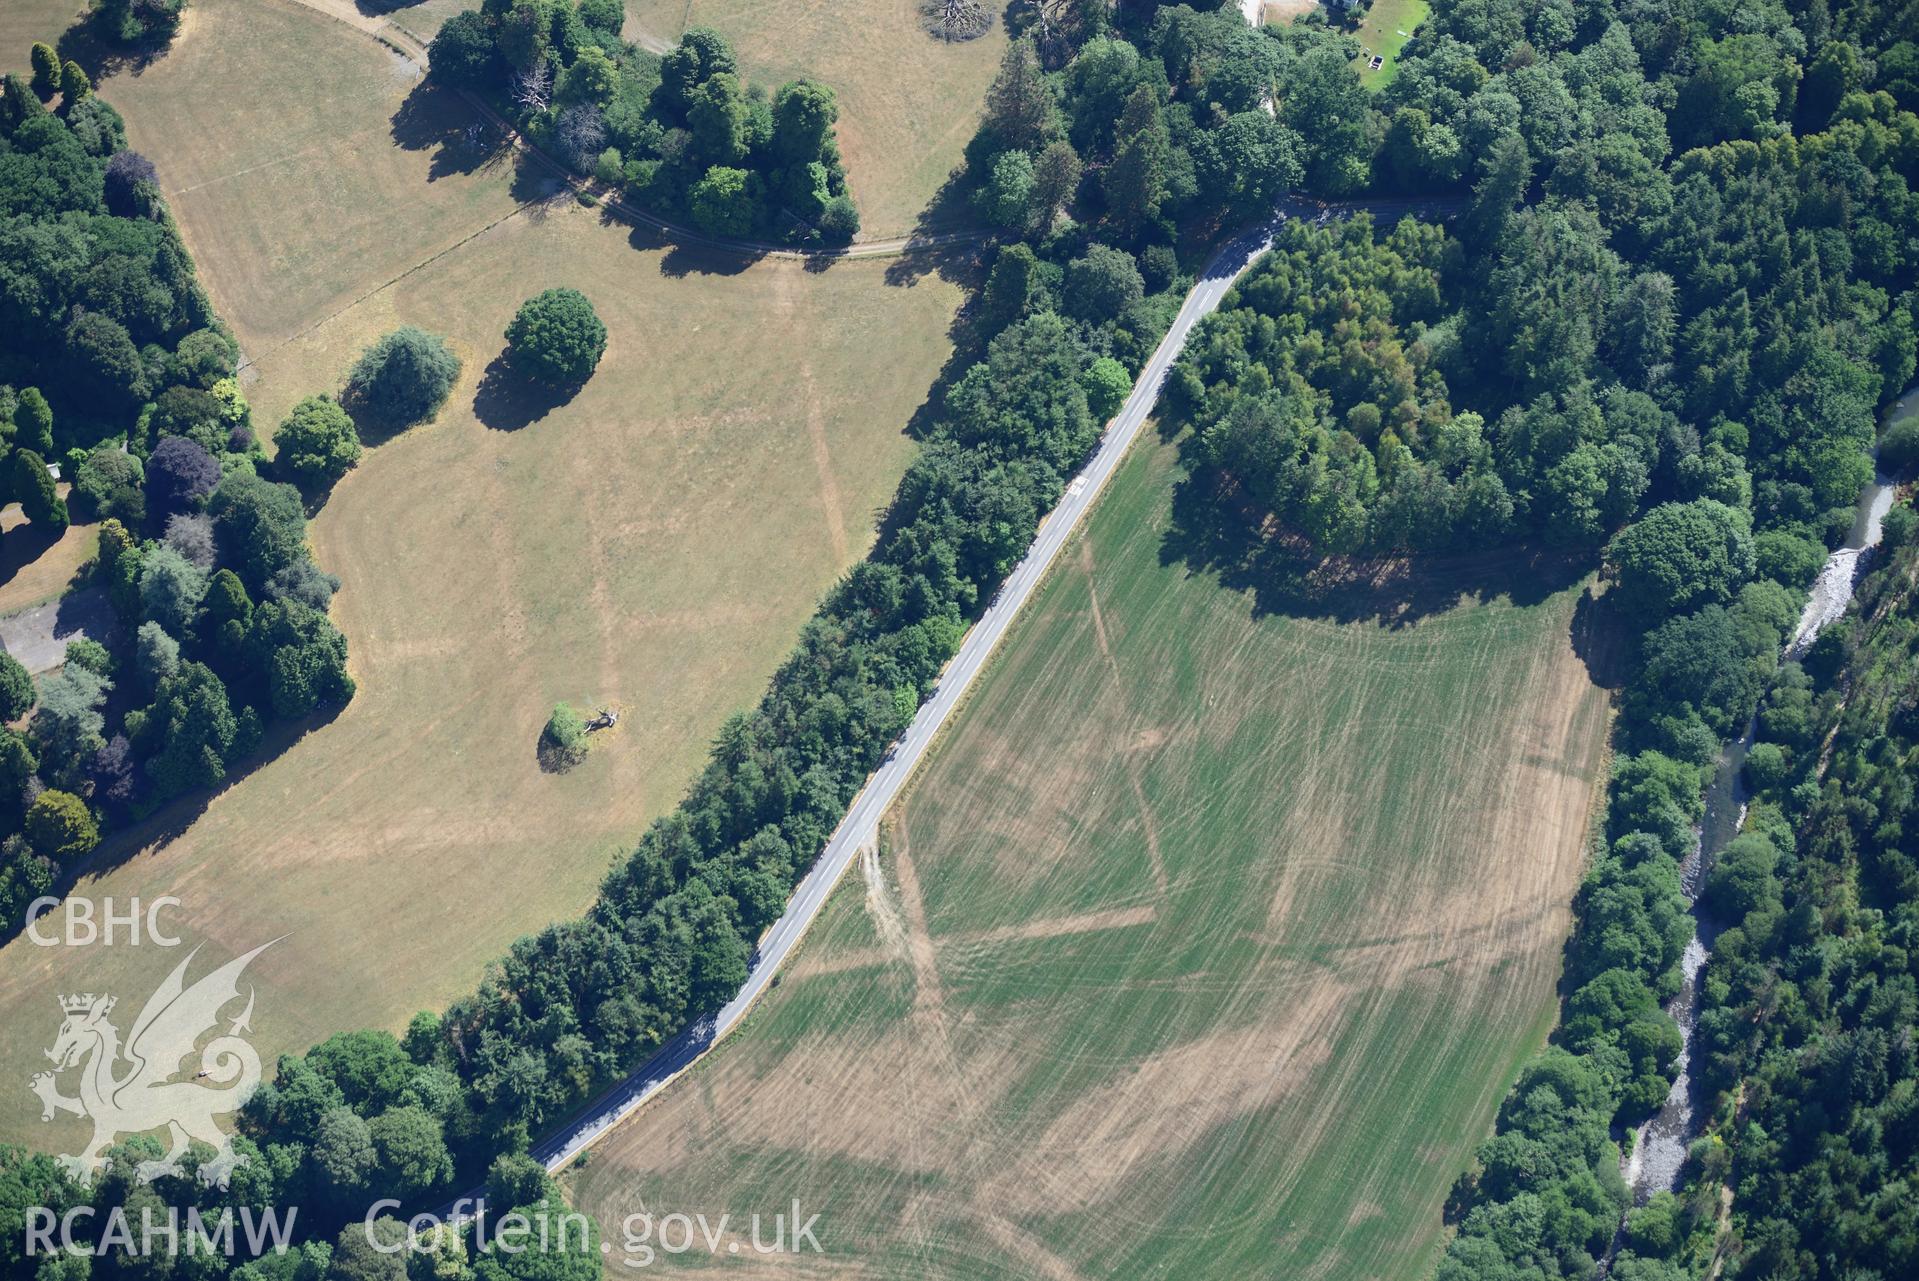 Royal Commission aerial photography of Trawsgoed Roman fort, showing exceptionally clear cropmark and parchmark detail of fort, vicus and ancillary structures, taken on 19th July 2018 during the 2018 drought.